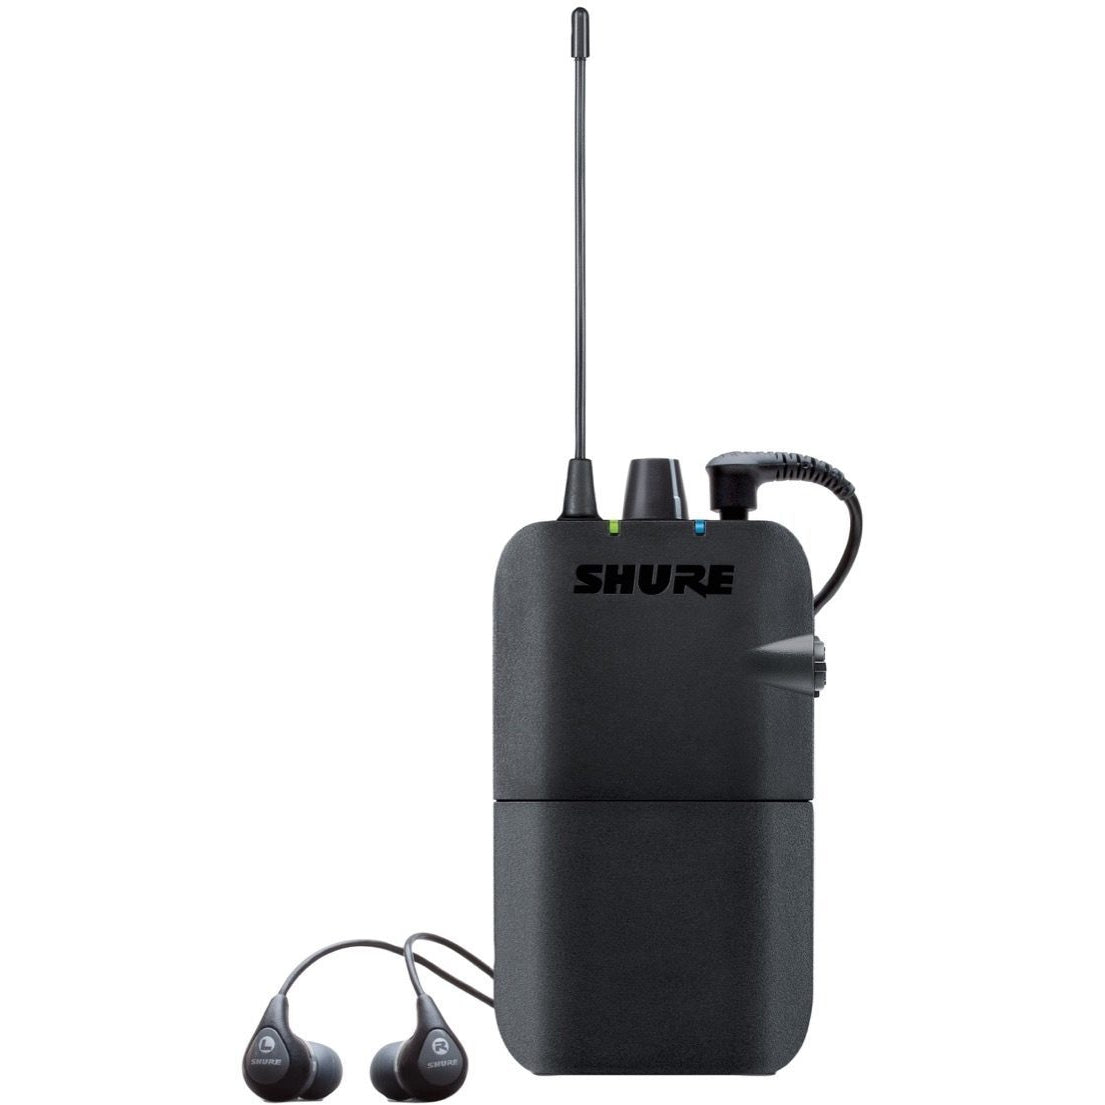 Shure PSM 300 IEM Wireless In-Ear Monitor System with SE112 Earphones, Band H20